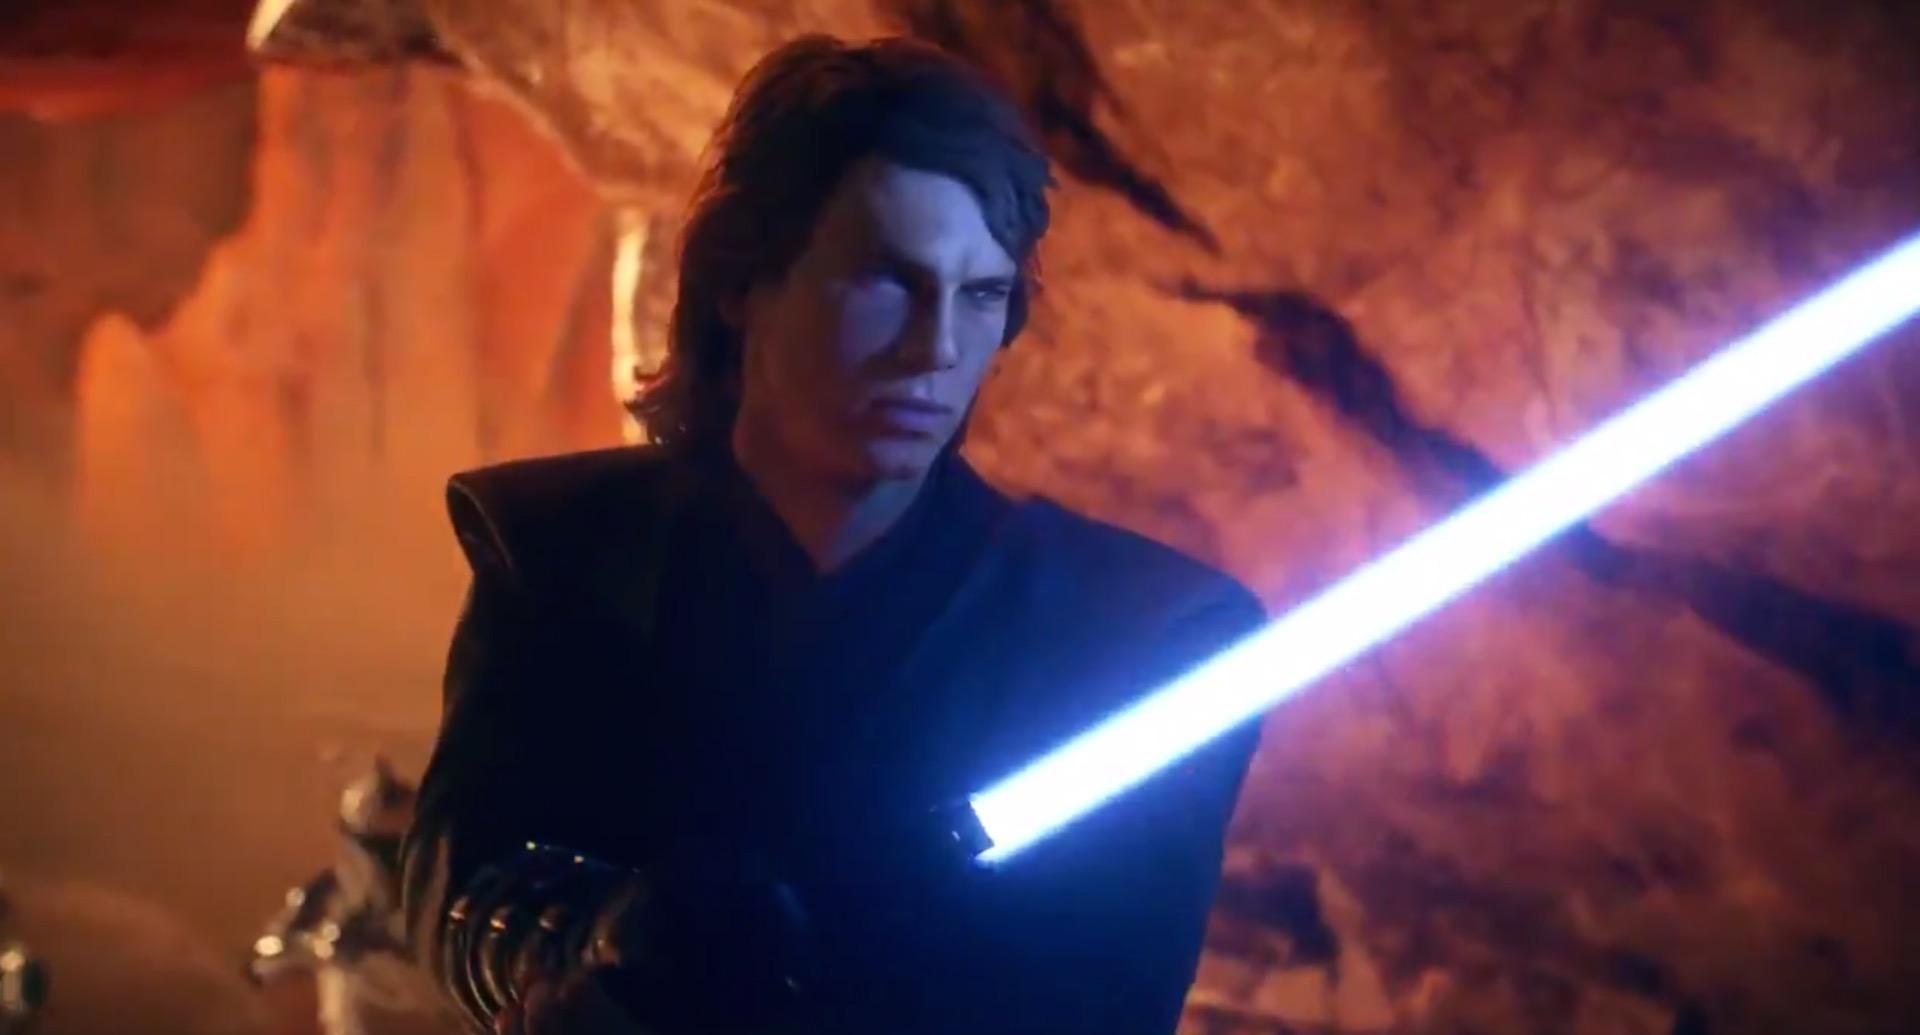 Star Wars Battlefront 2: Here Are Anakin Skywalker’s Abilities and Star